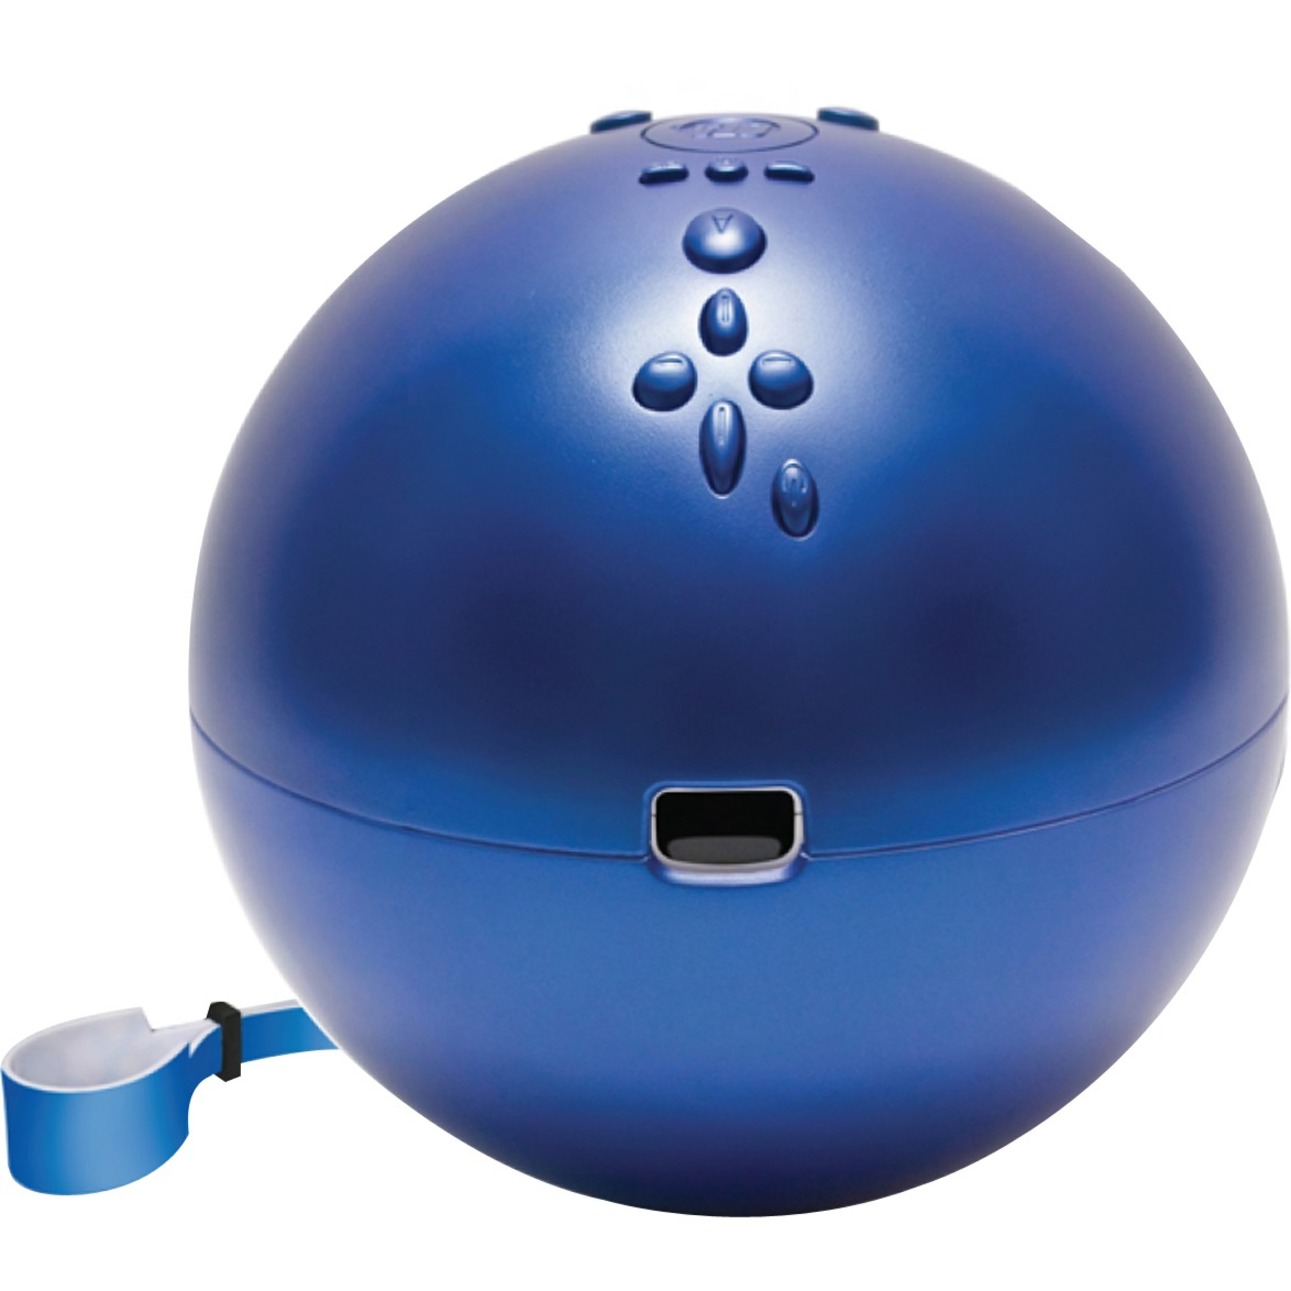 CTA Digital Bowling Ball for Wii - image 1 of 2